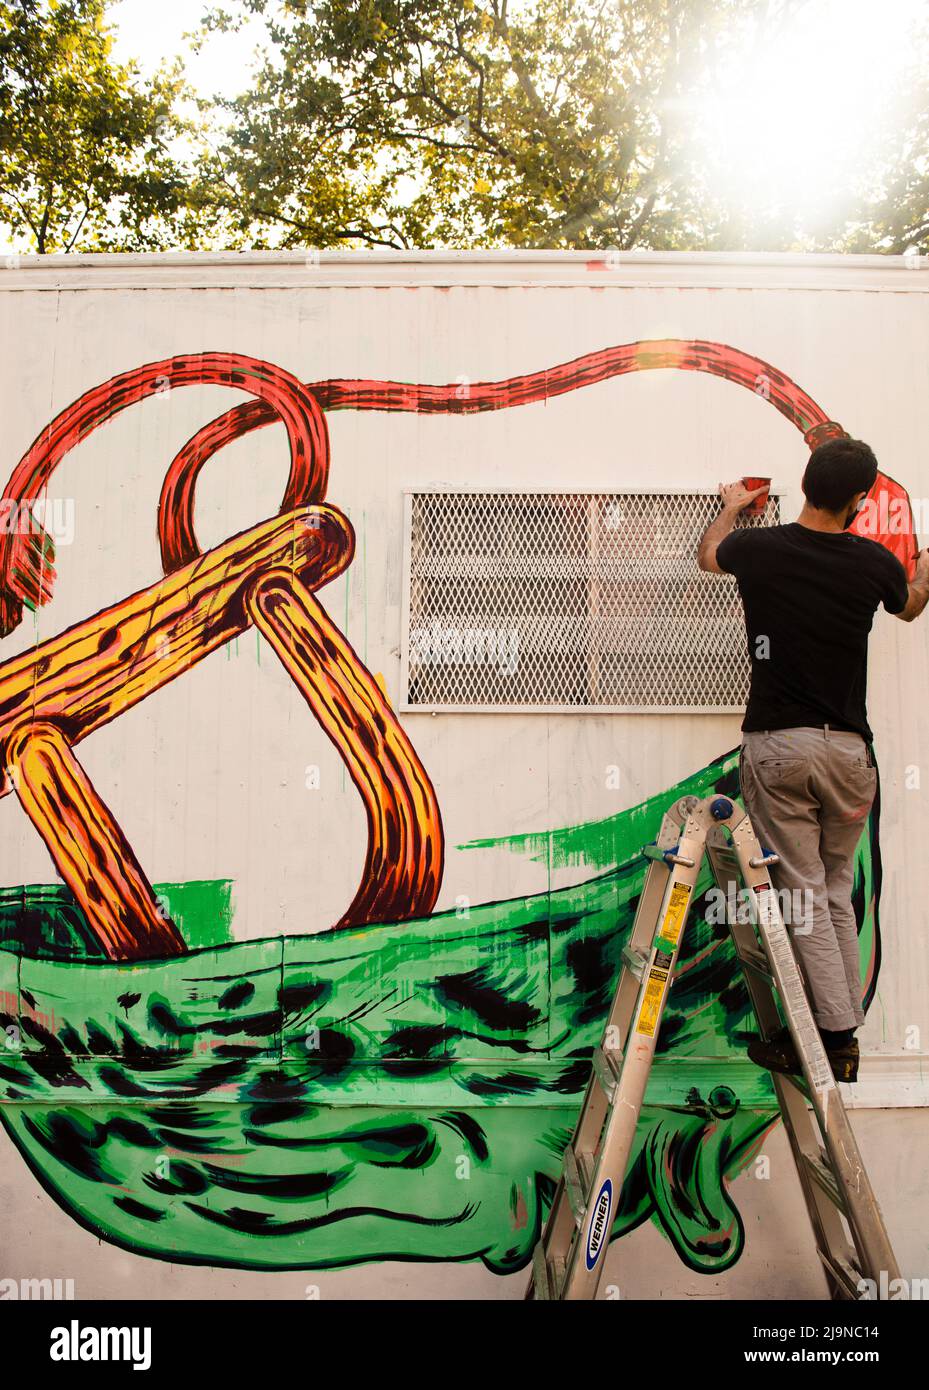 Man painting a graffiti mural in Lower East Side Manhattan, New York City Stock Photo